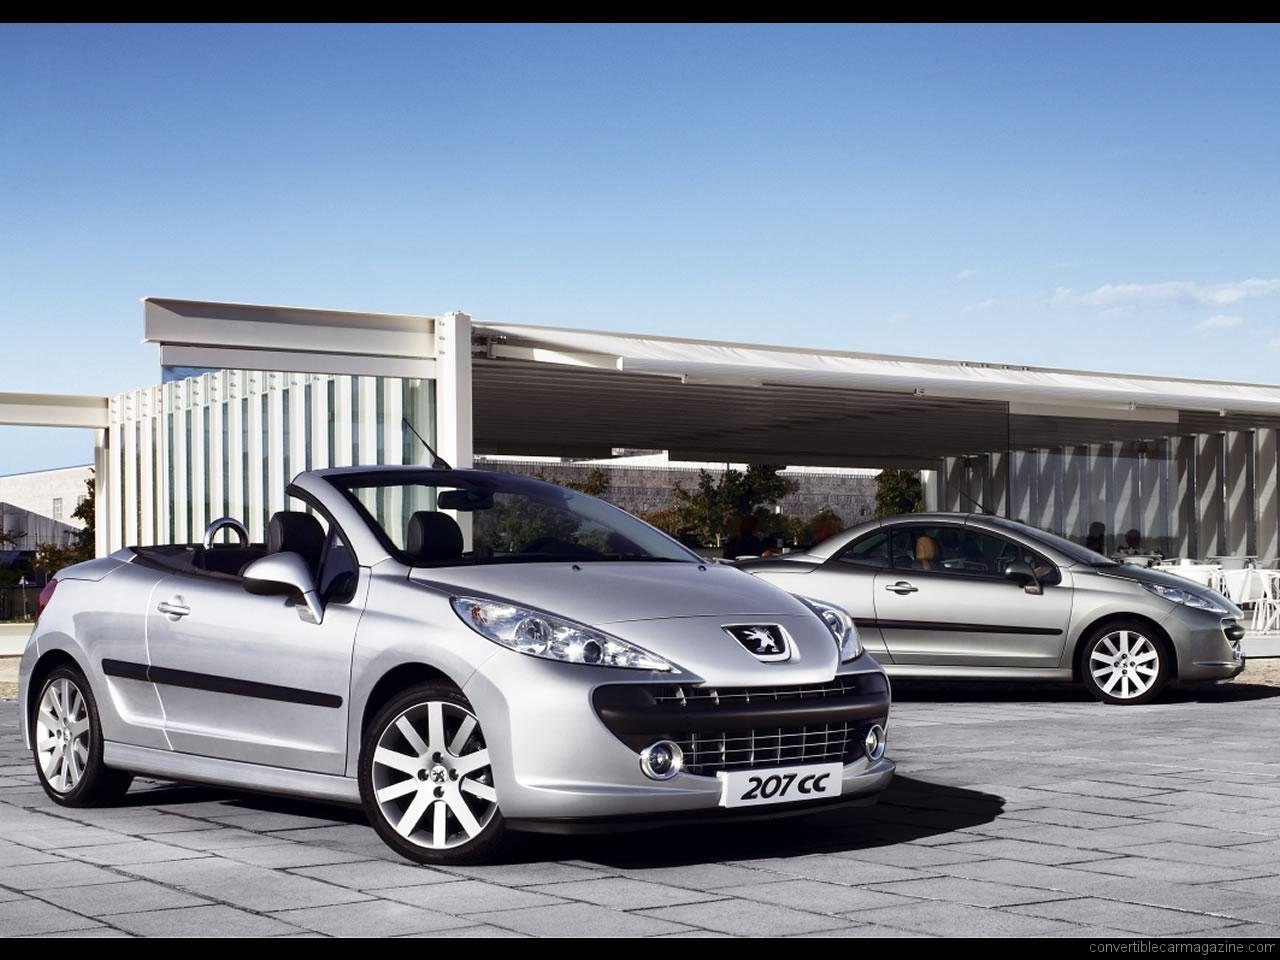 Peugeot 207 CC Buying Guide